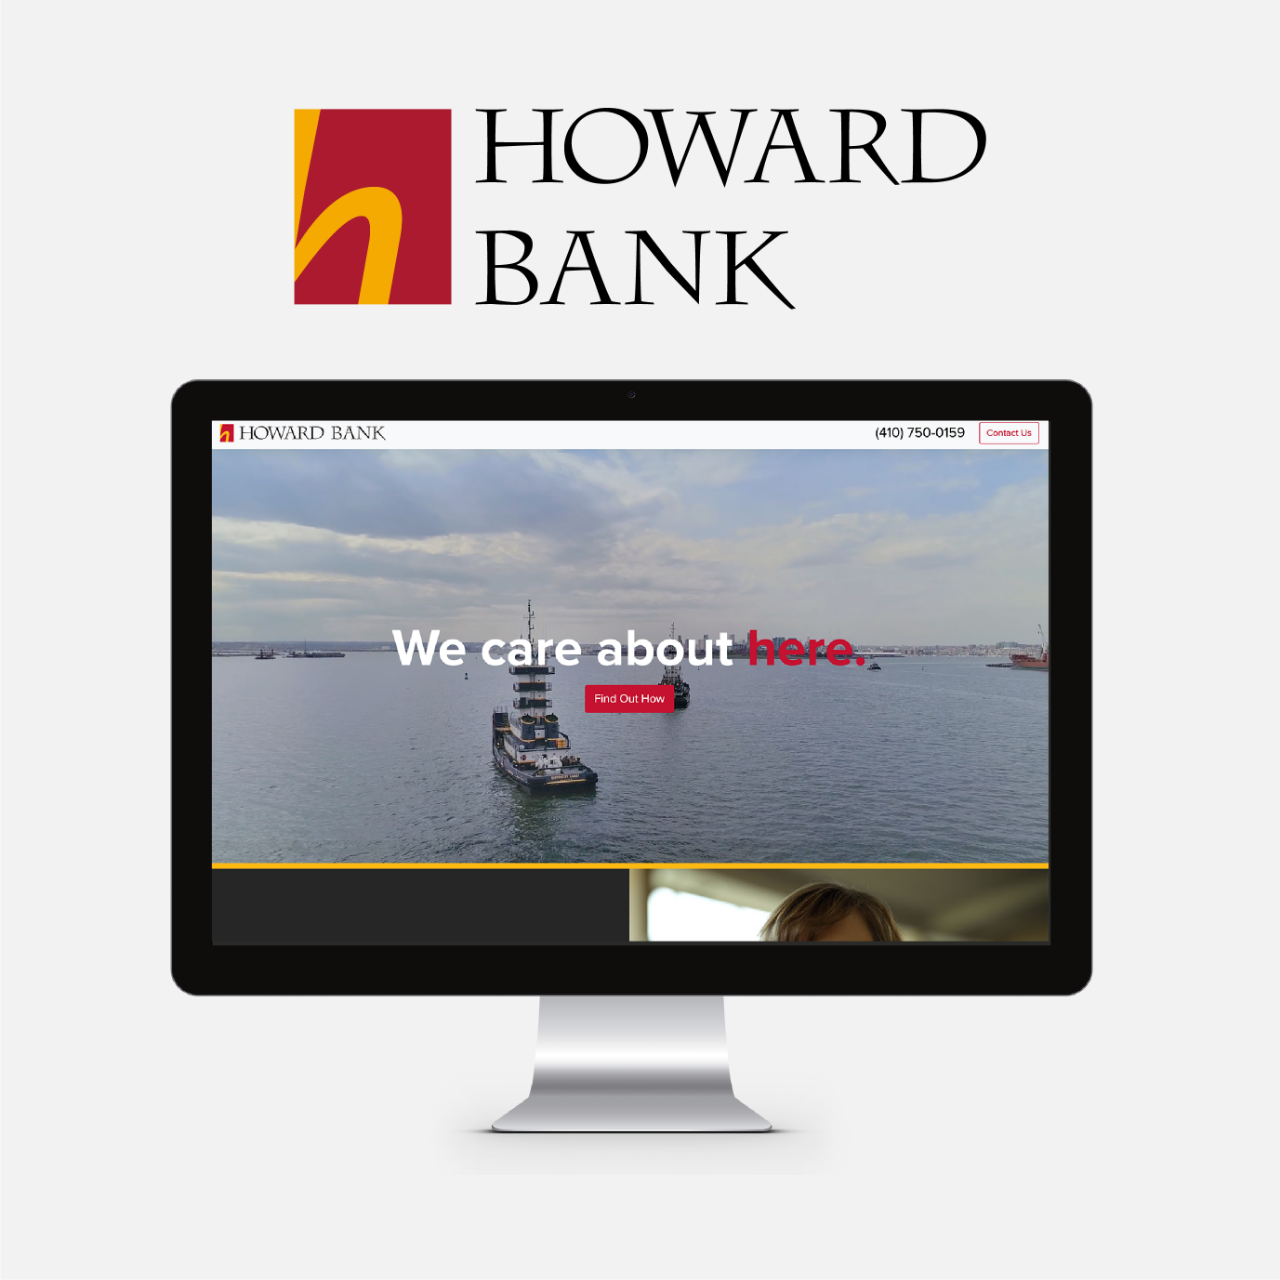 Gigawatt Group initiated a new brand campaign for Howard Bank following its merger with First Mariner.